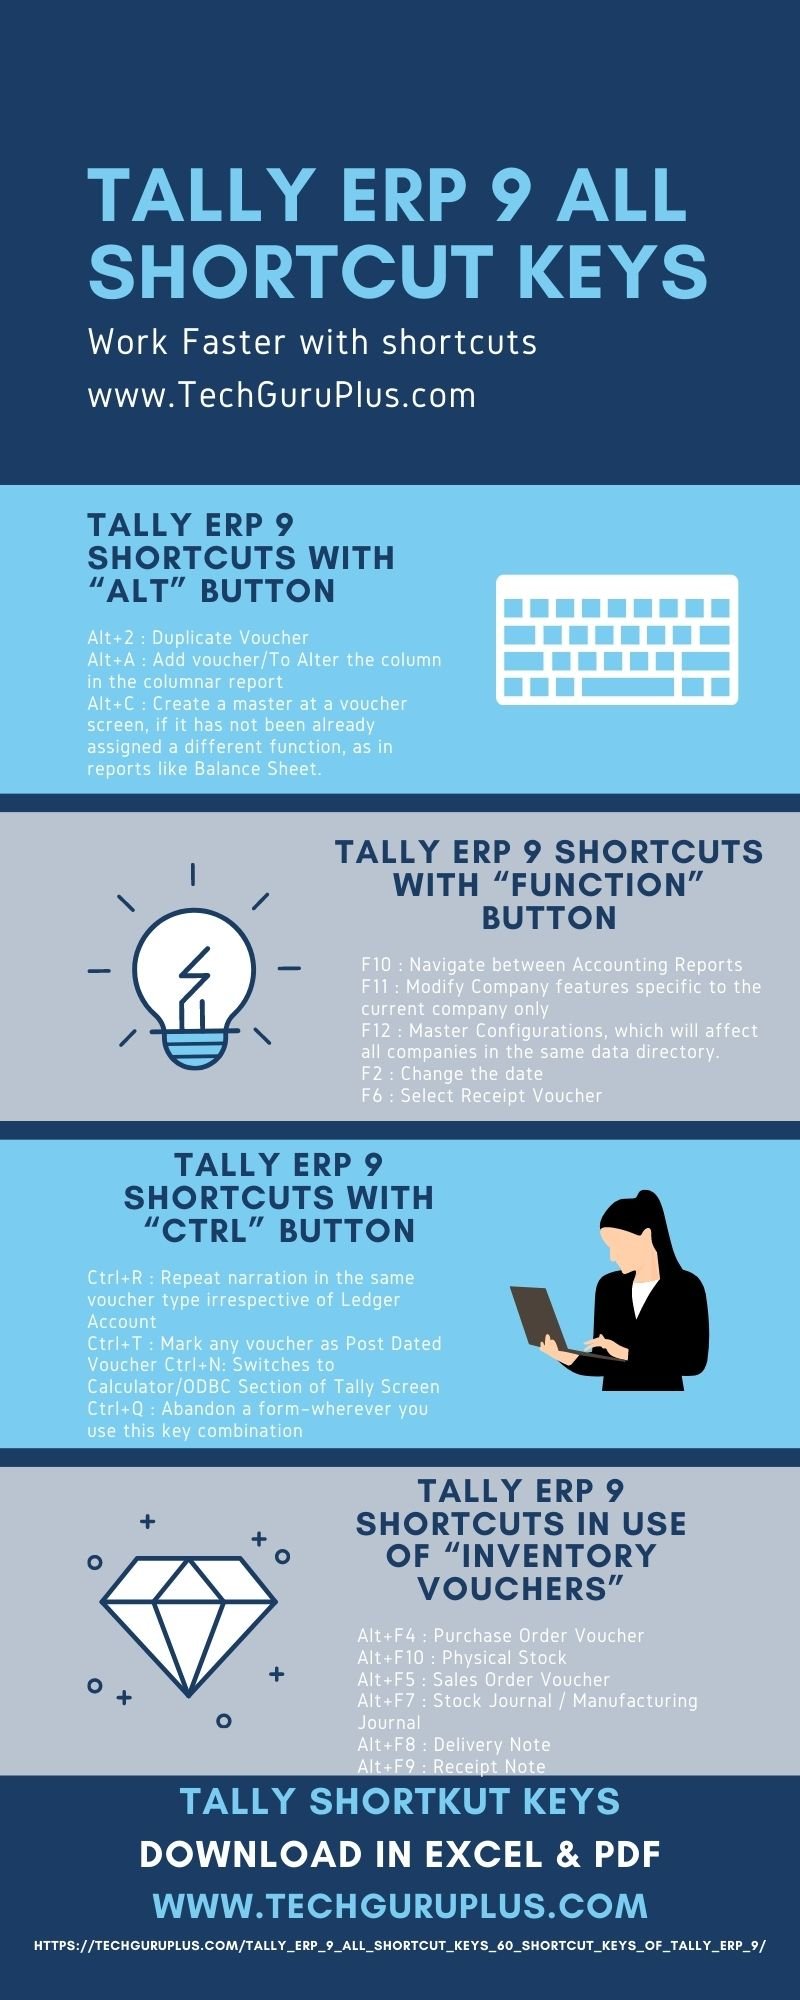 Tally ERP 9 Shortcut Keys in pdf and excel